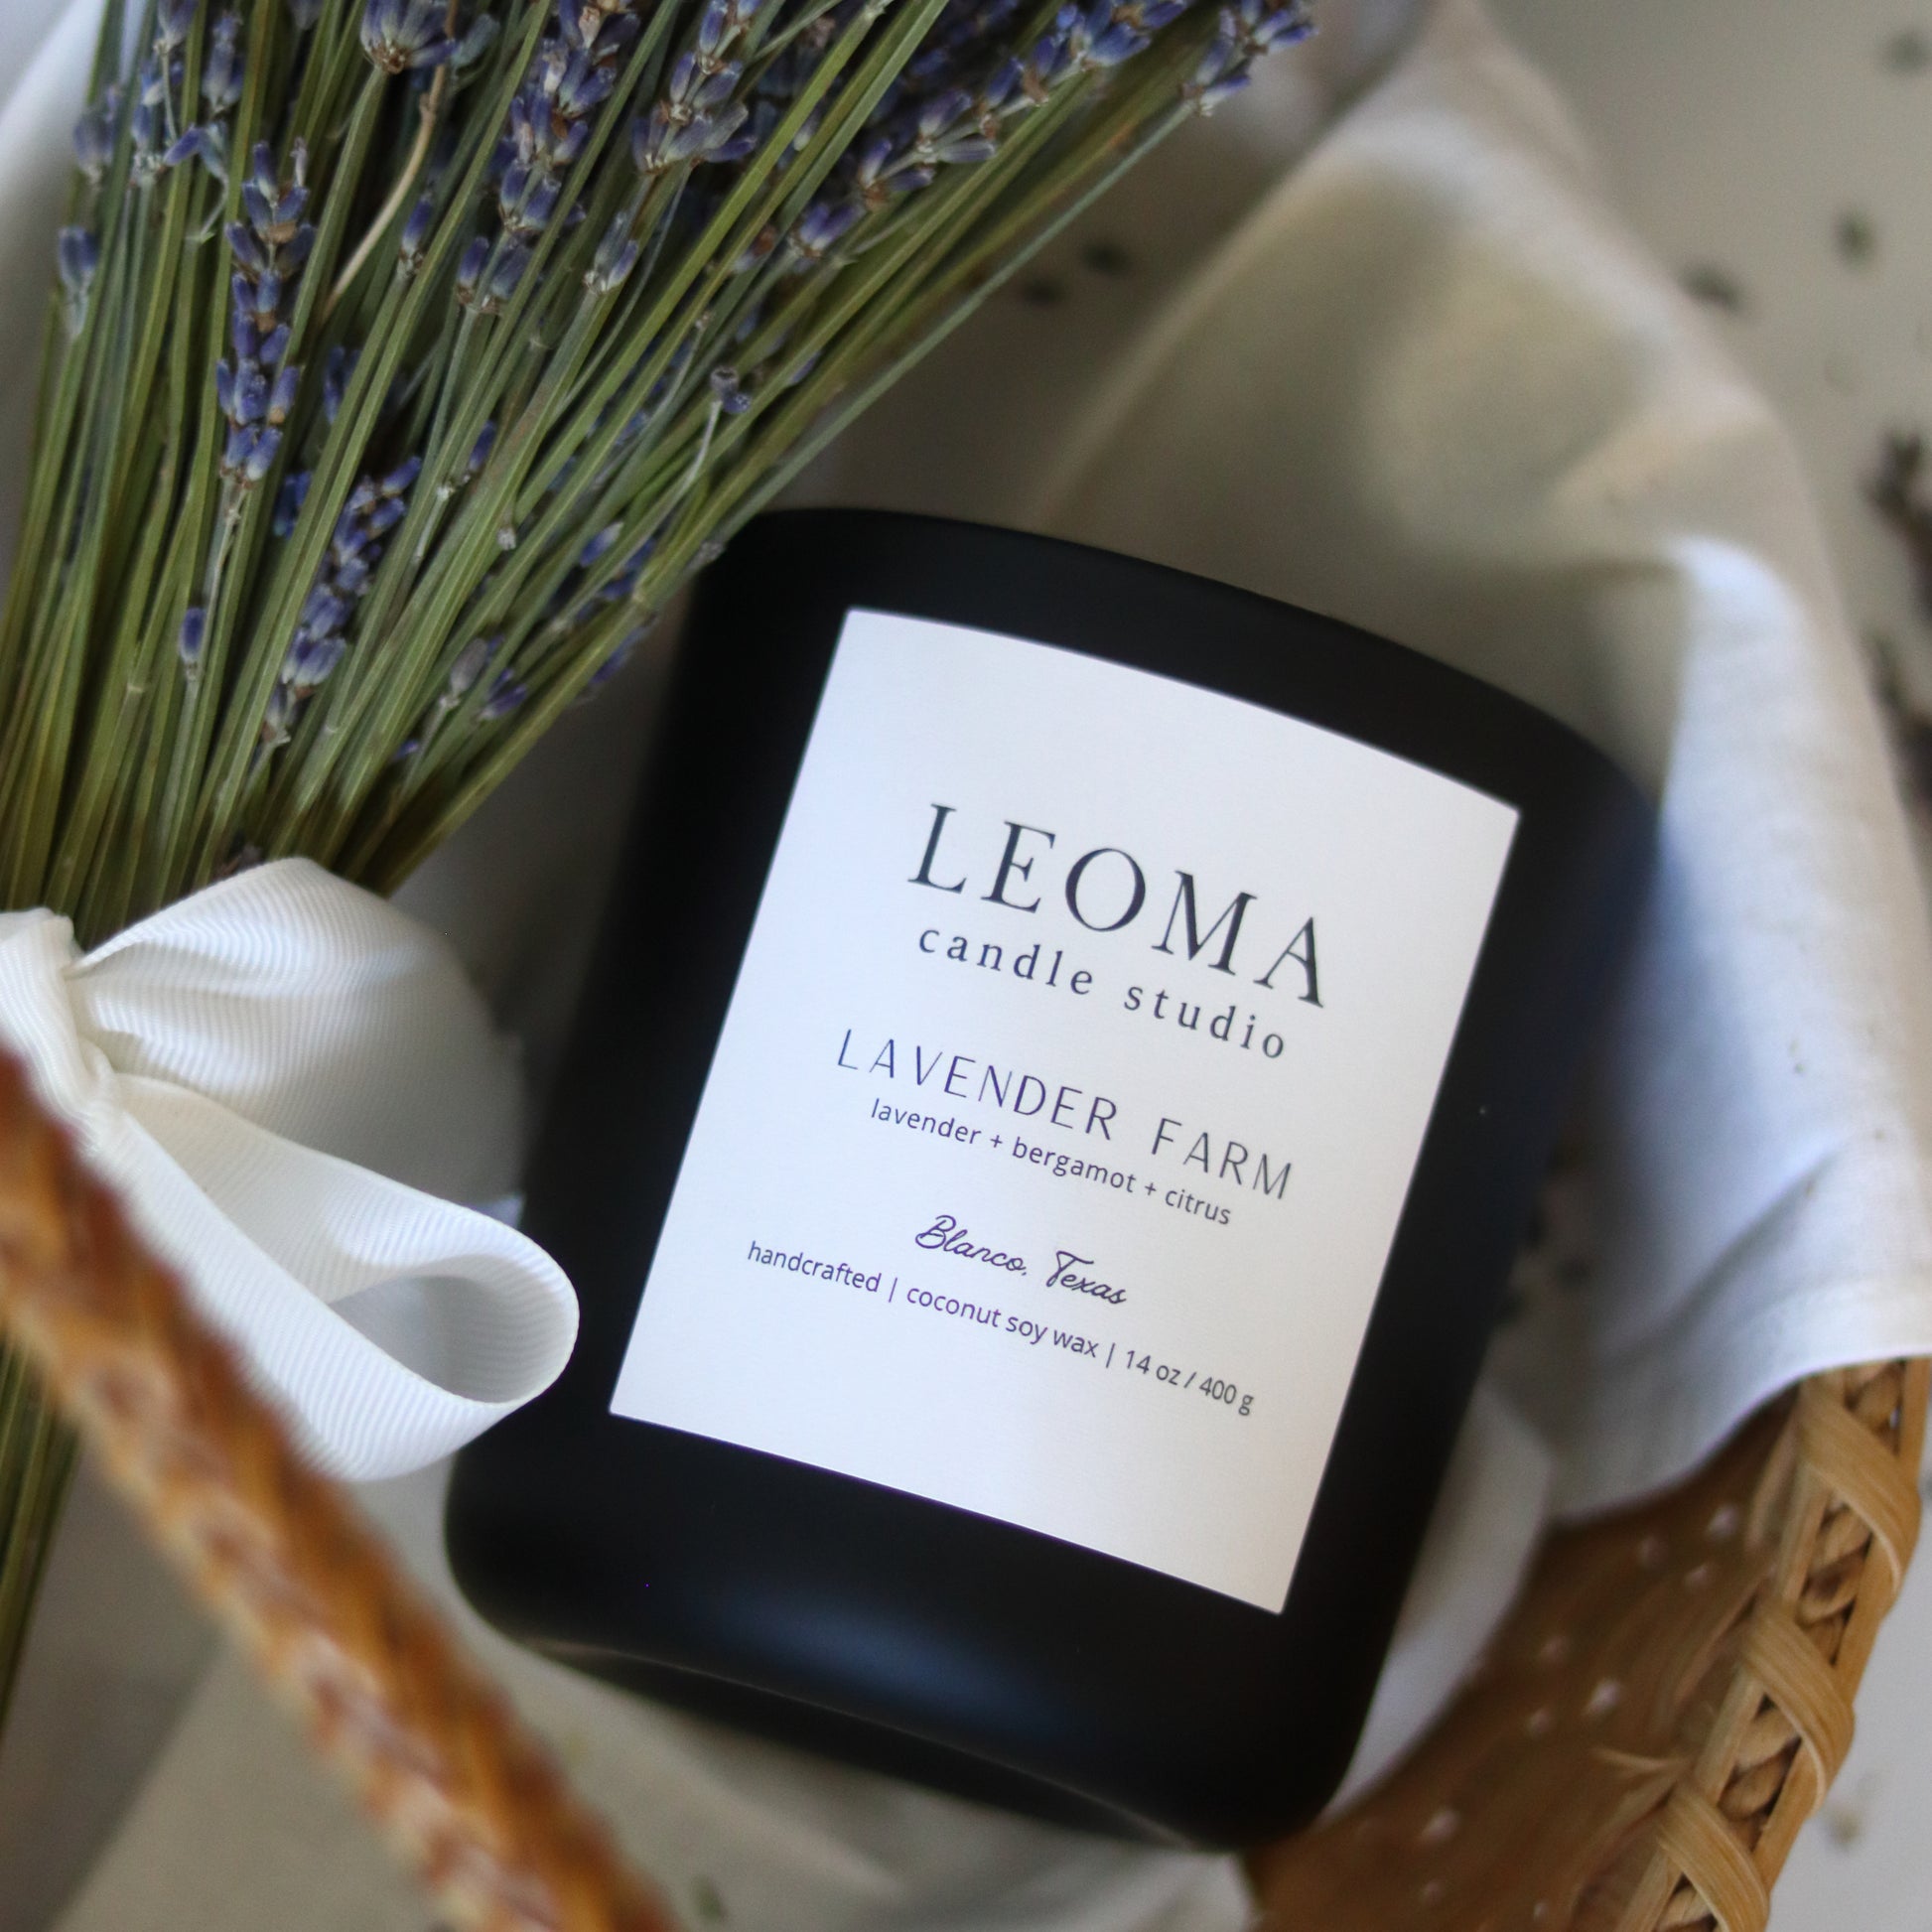 Handcrafted eco-friendly scented candle. Natural coconut & soy wax, toxin-free, 100% cotton wicks. Black vessel. Lavender Farm classic scented.